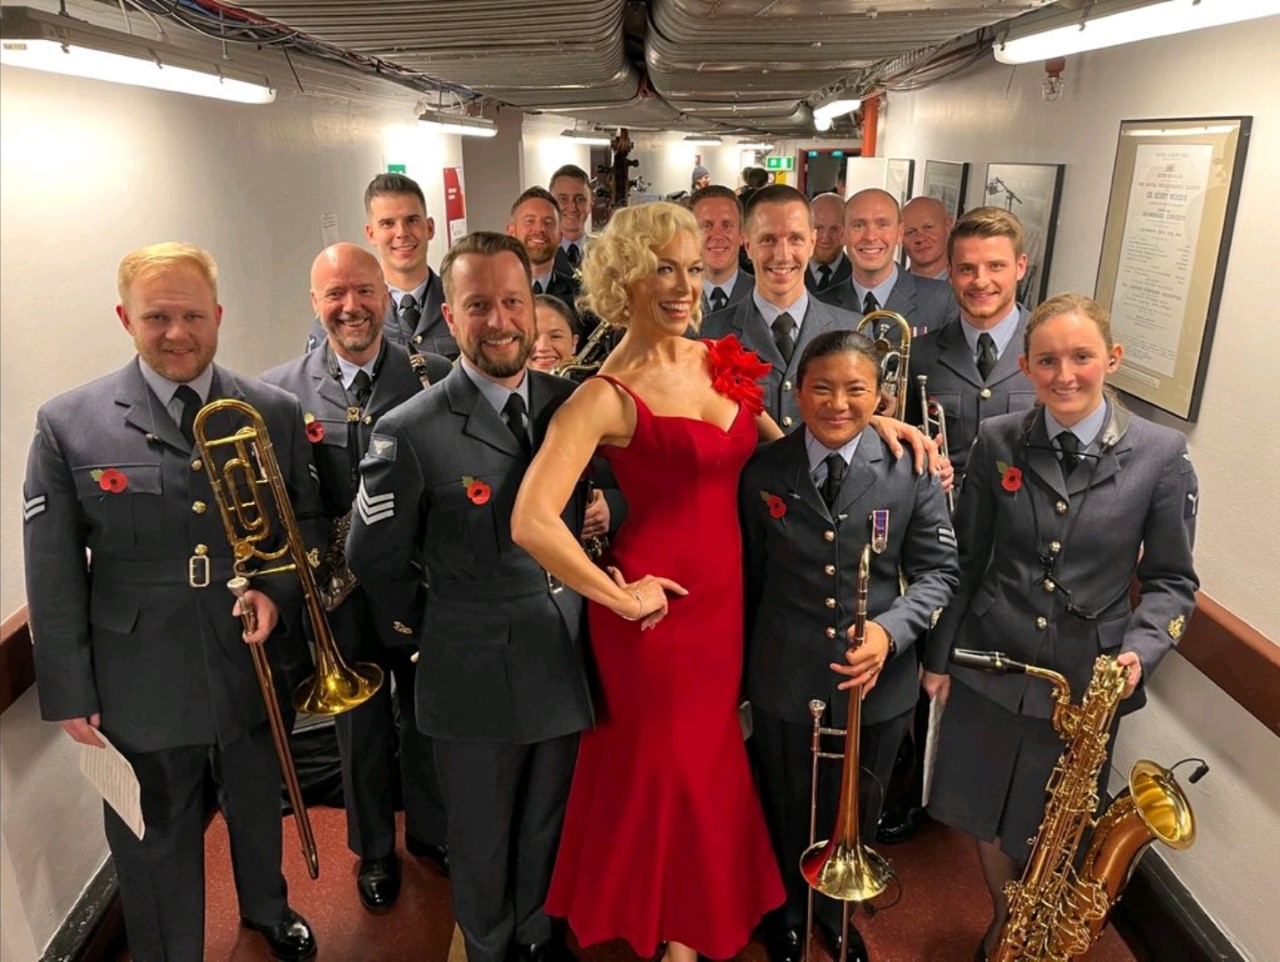 Image shows RAF Musicians with lady in a red dress.